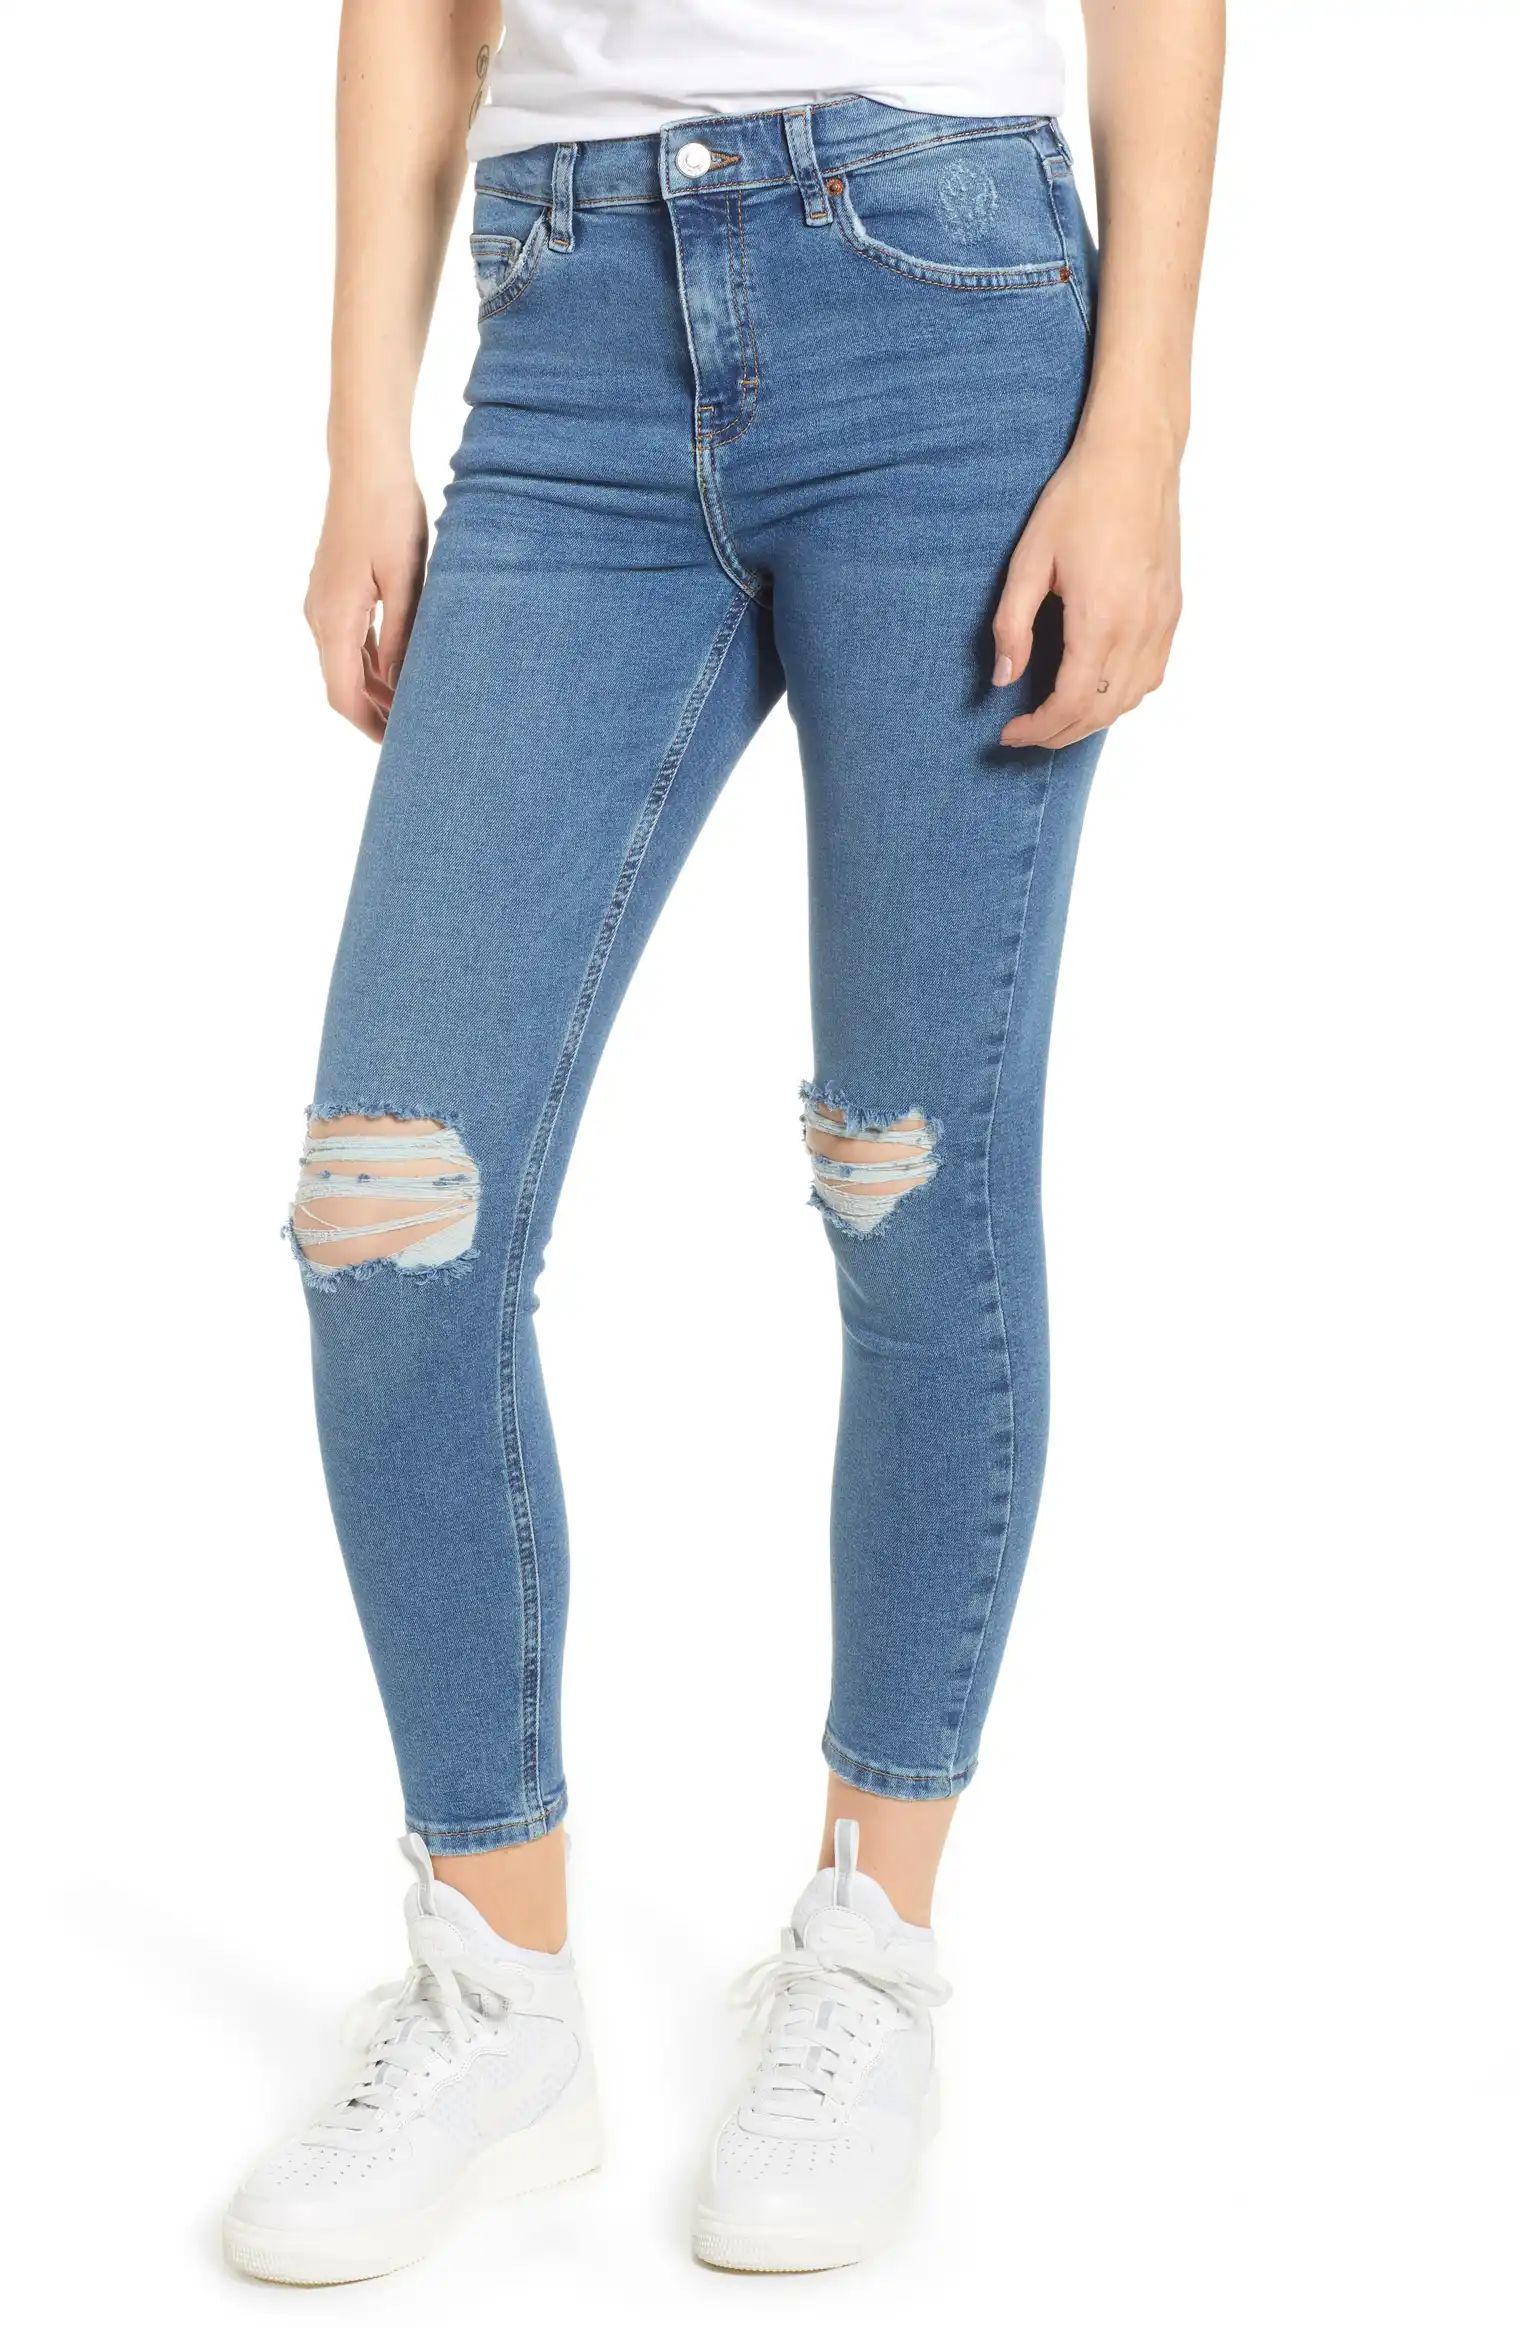 Topshop Jamie High Waist Ripped Jeans | Nordstrom | Nordstrom